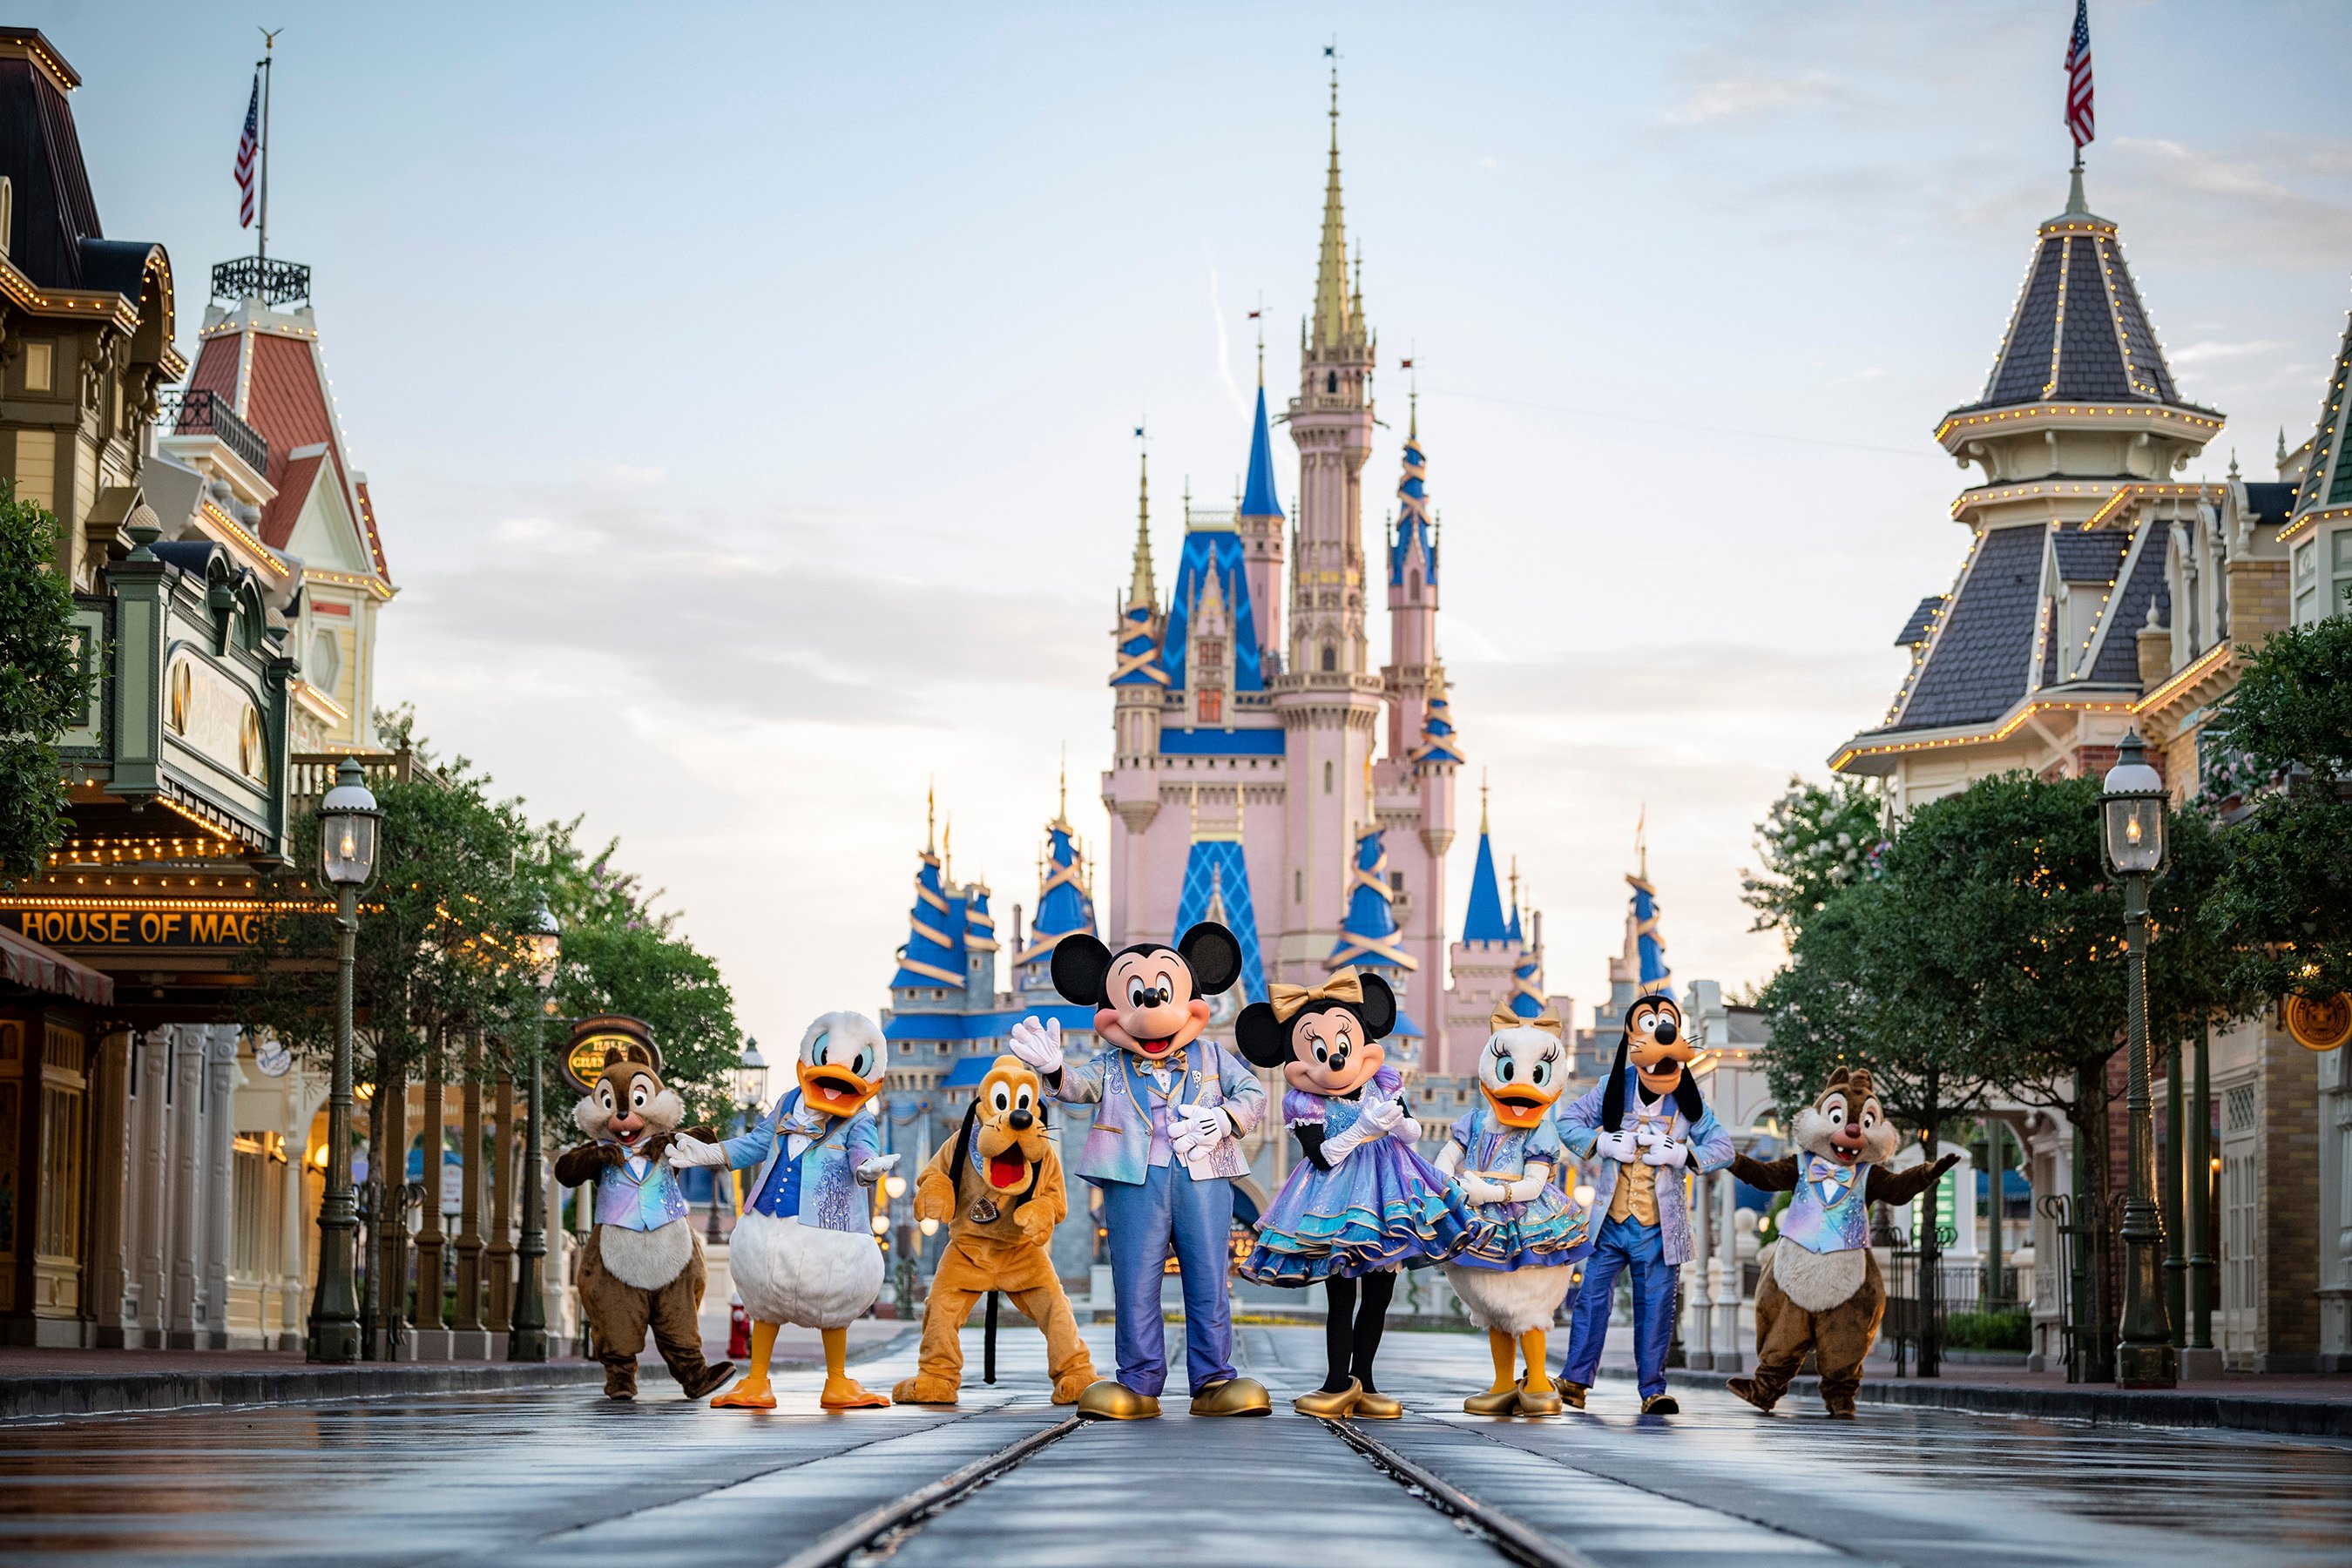 How to plan a trip to Disney World: It's complicated, say some fans